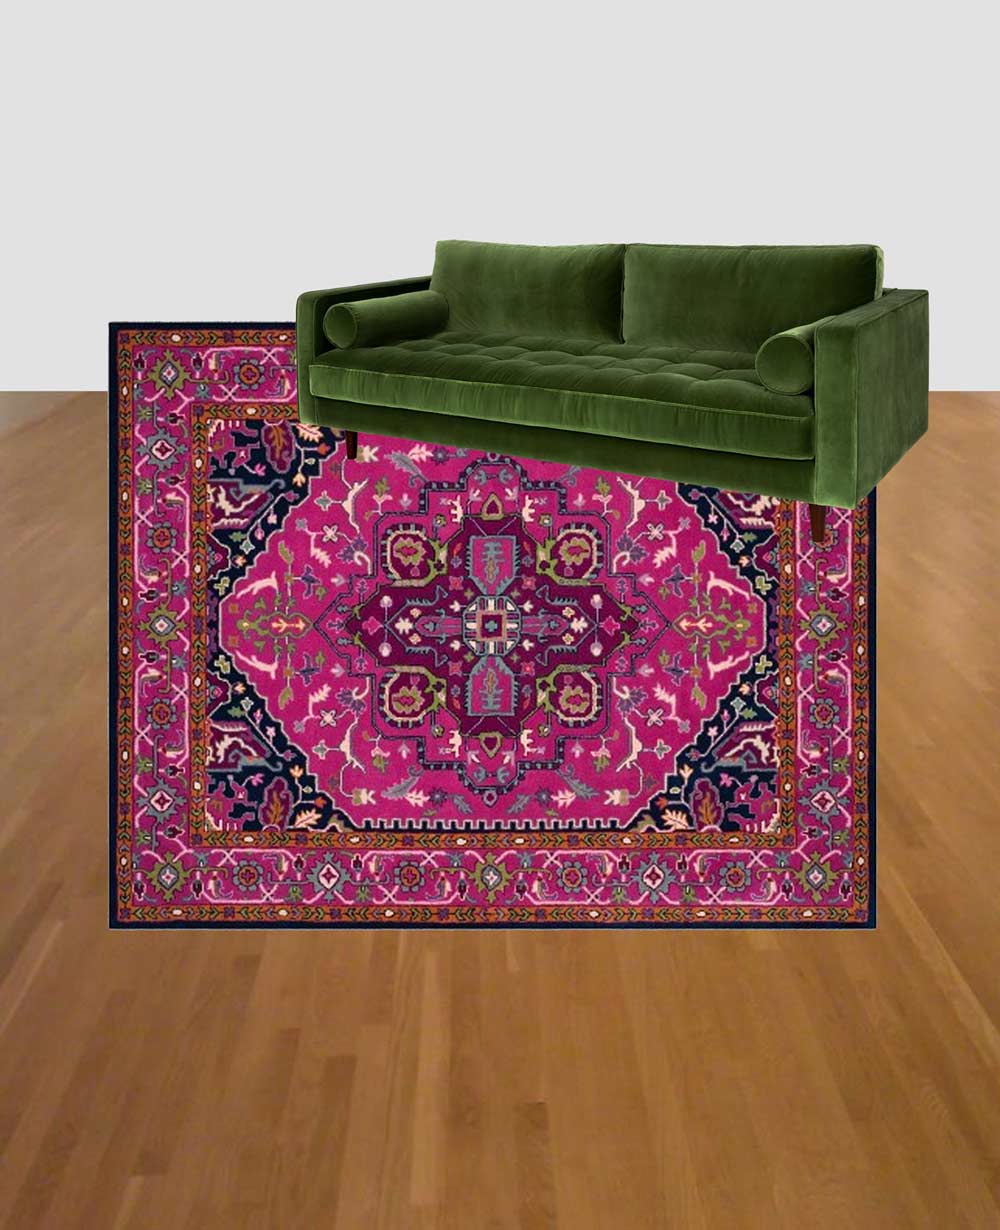 Green couch and pink rug combo: Article Sven Grass Green Velvet couch with Target Safavieh Alden rug mockup